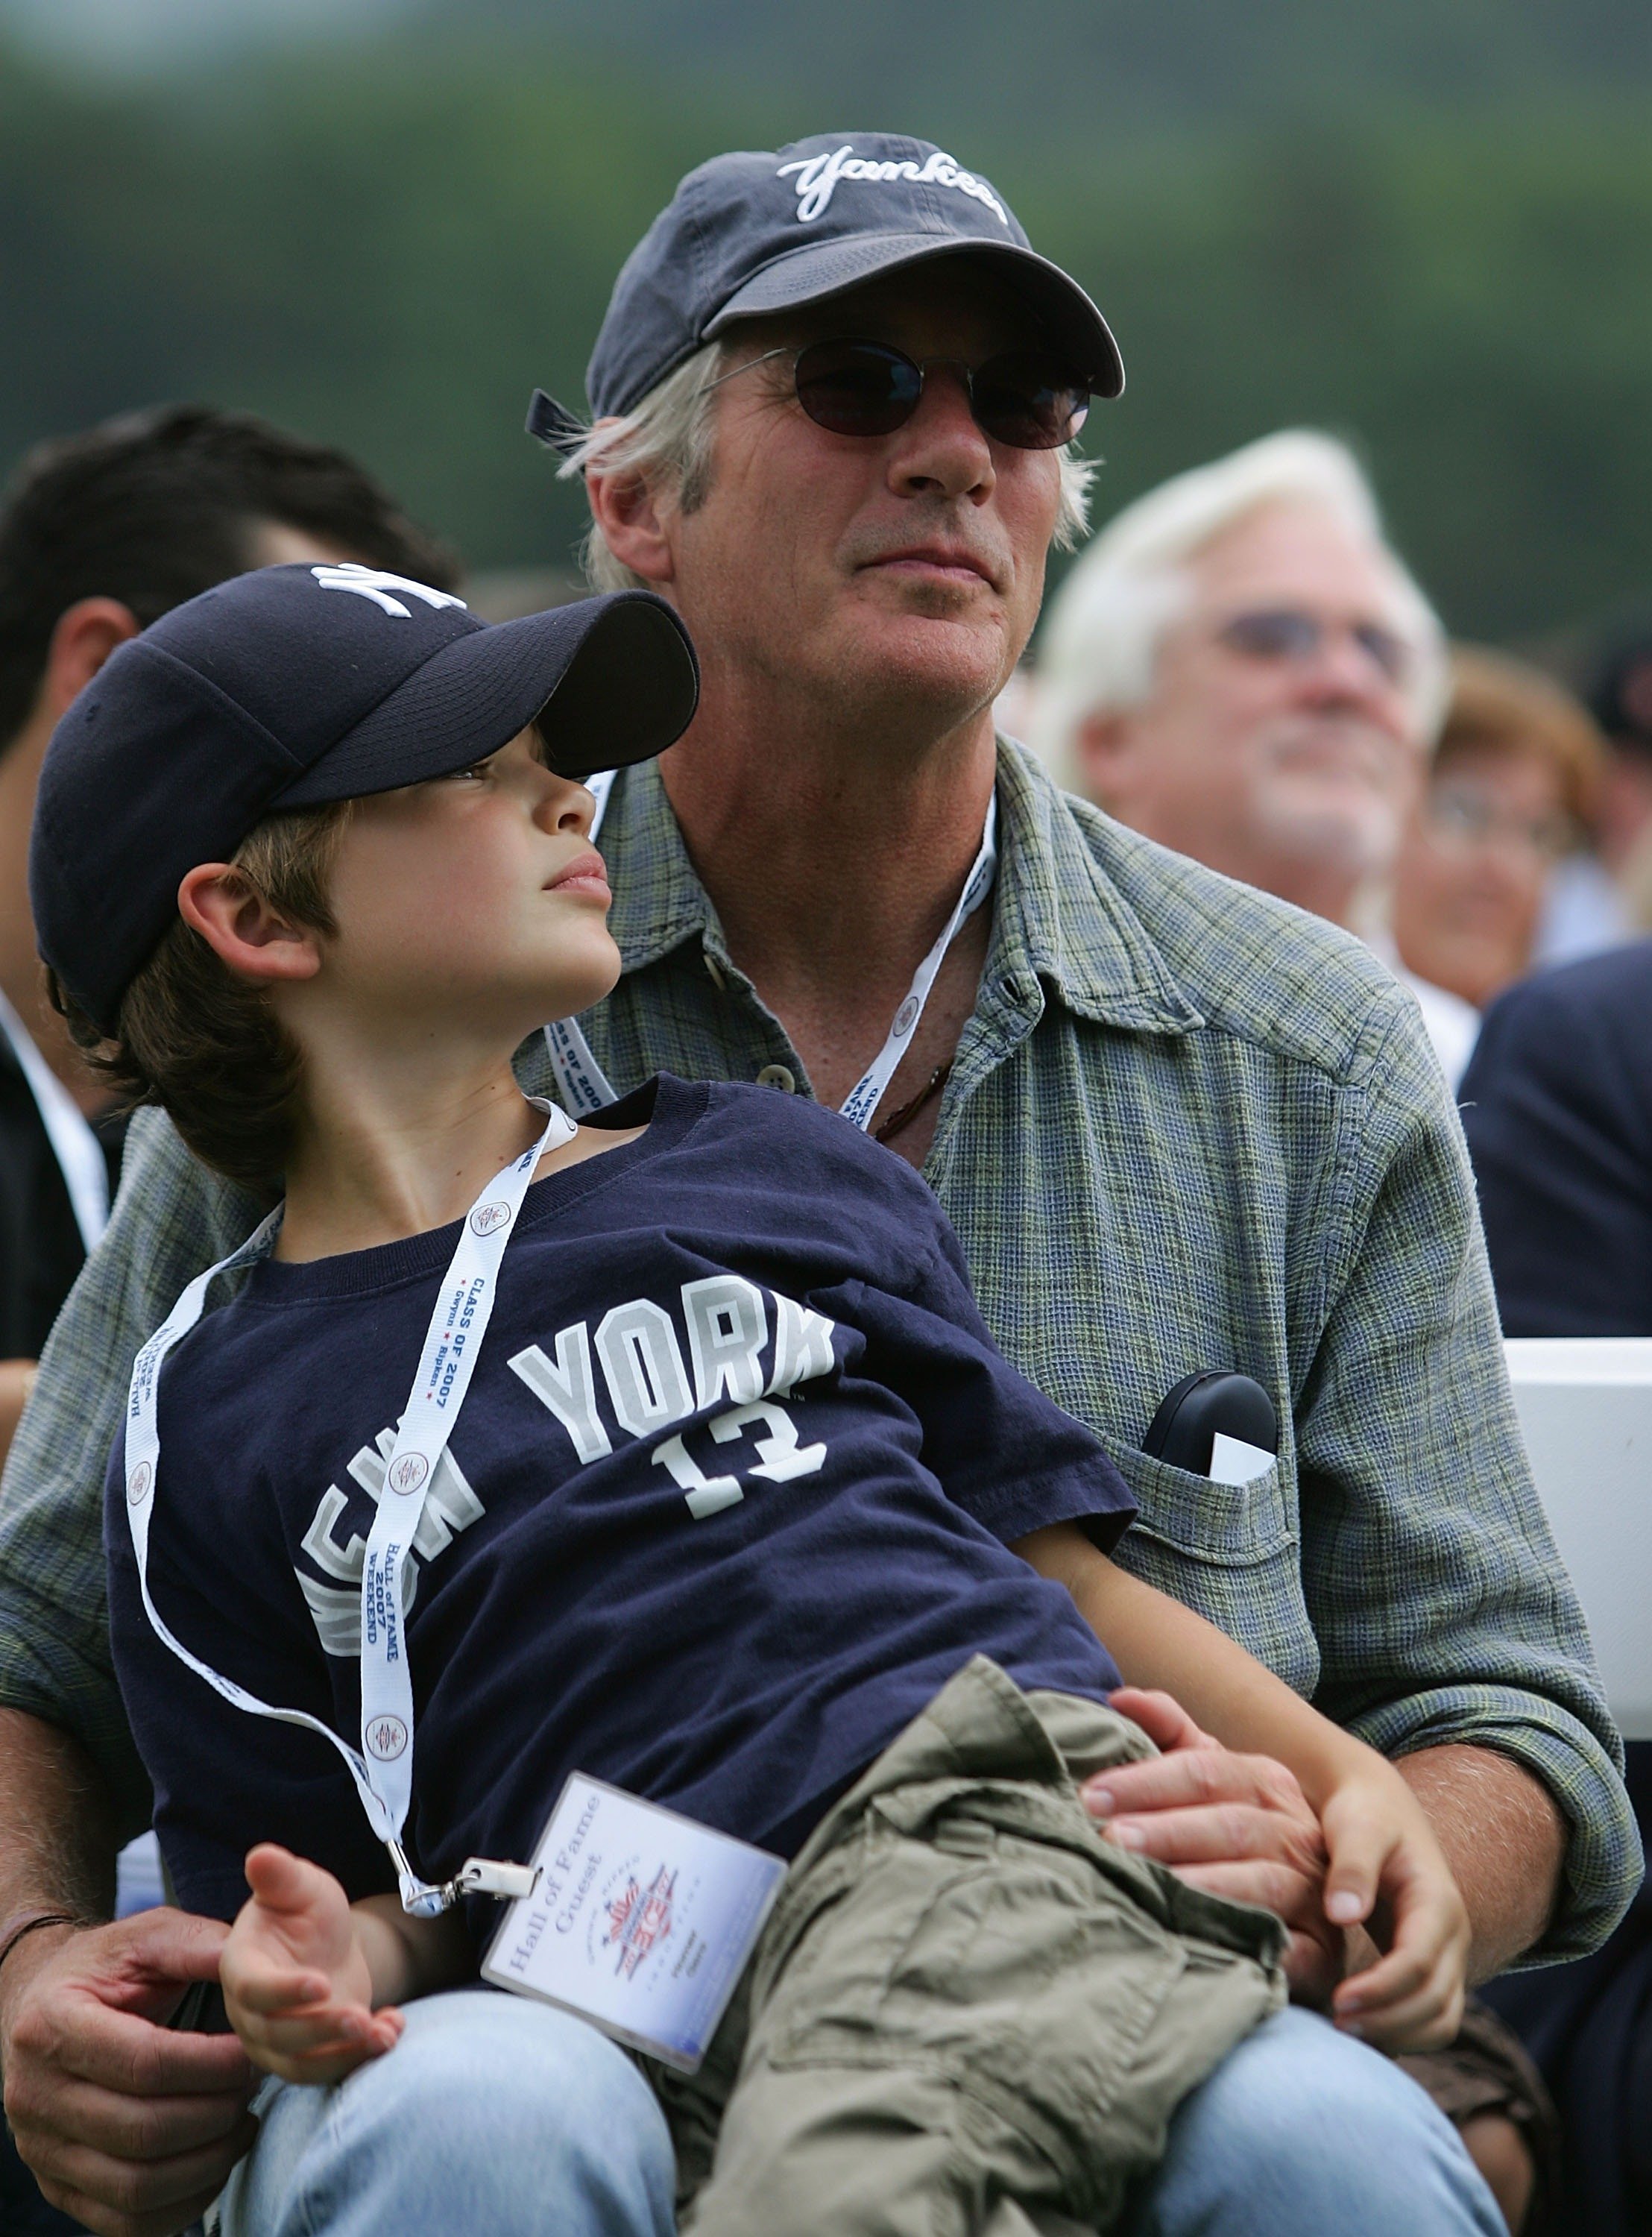 Richard Gere and son Homer watch the Baseball Hall of Fame induction ceremony on July 29, 2007, at Clark Sports Center in Cooperstown, New York. | Source: Getty Images.